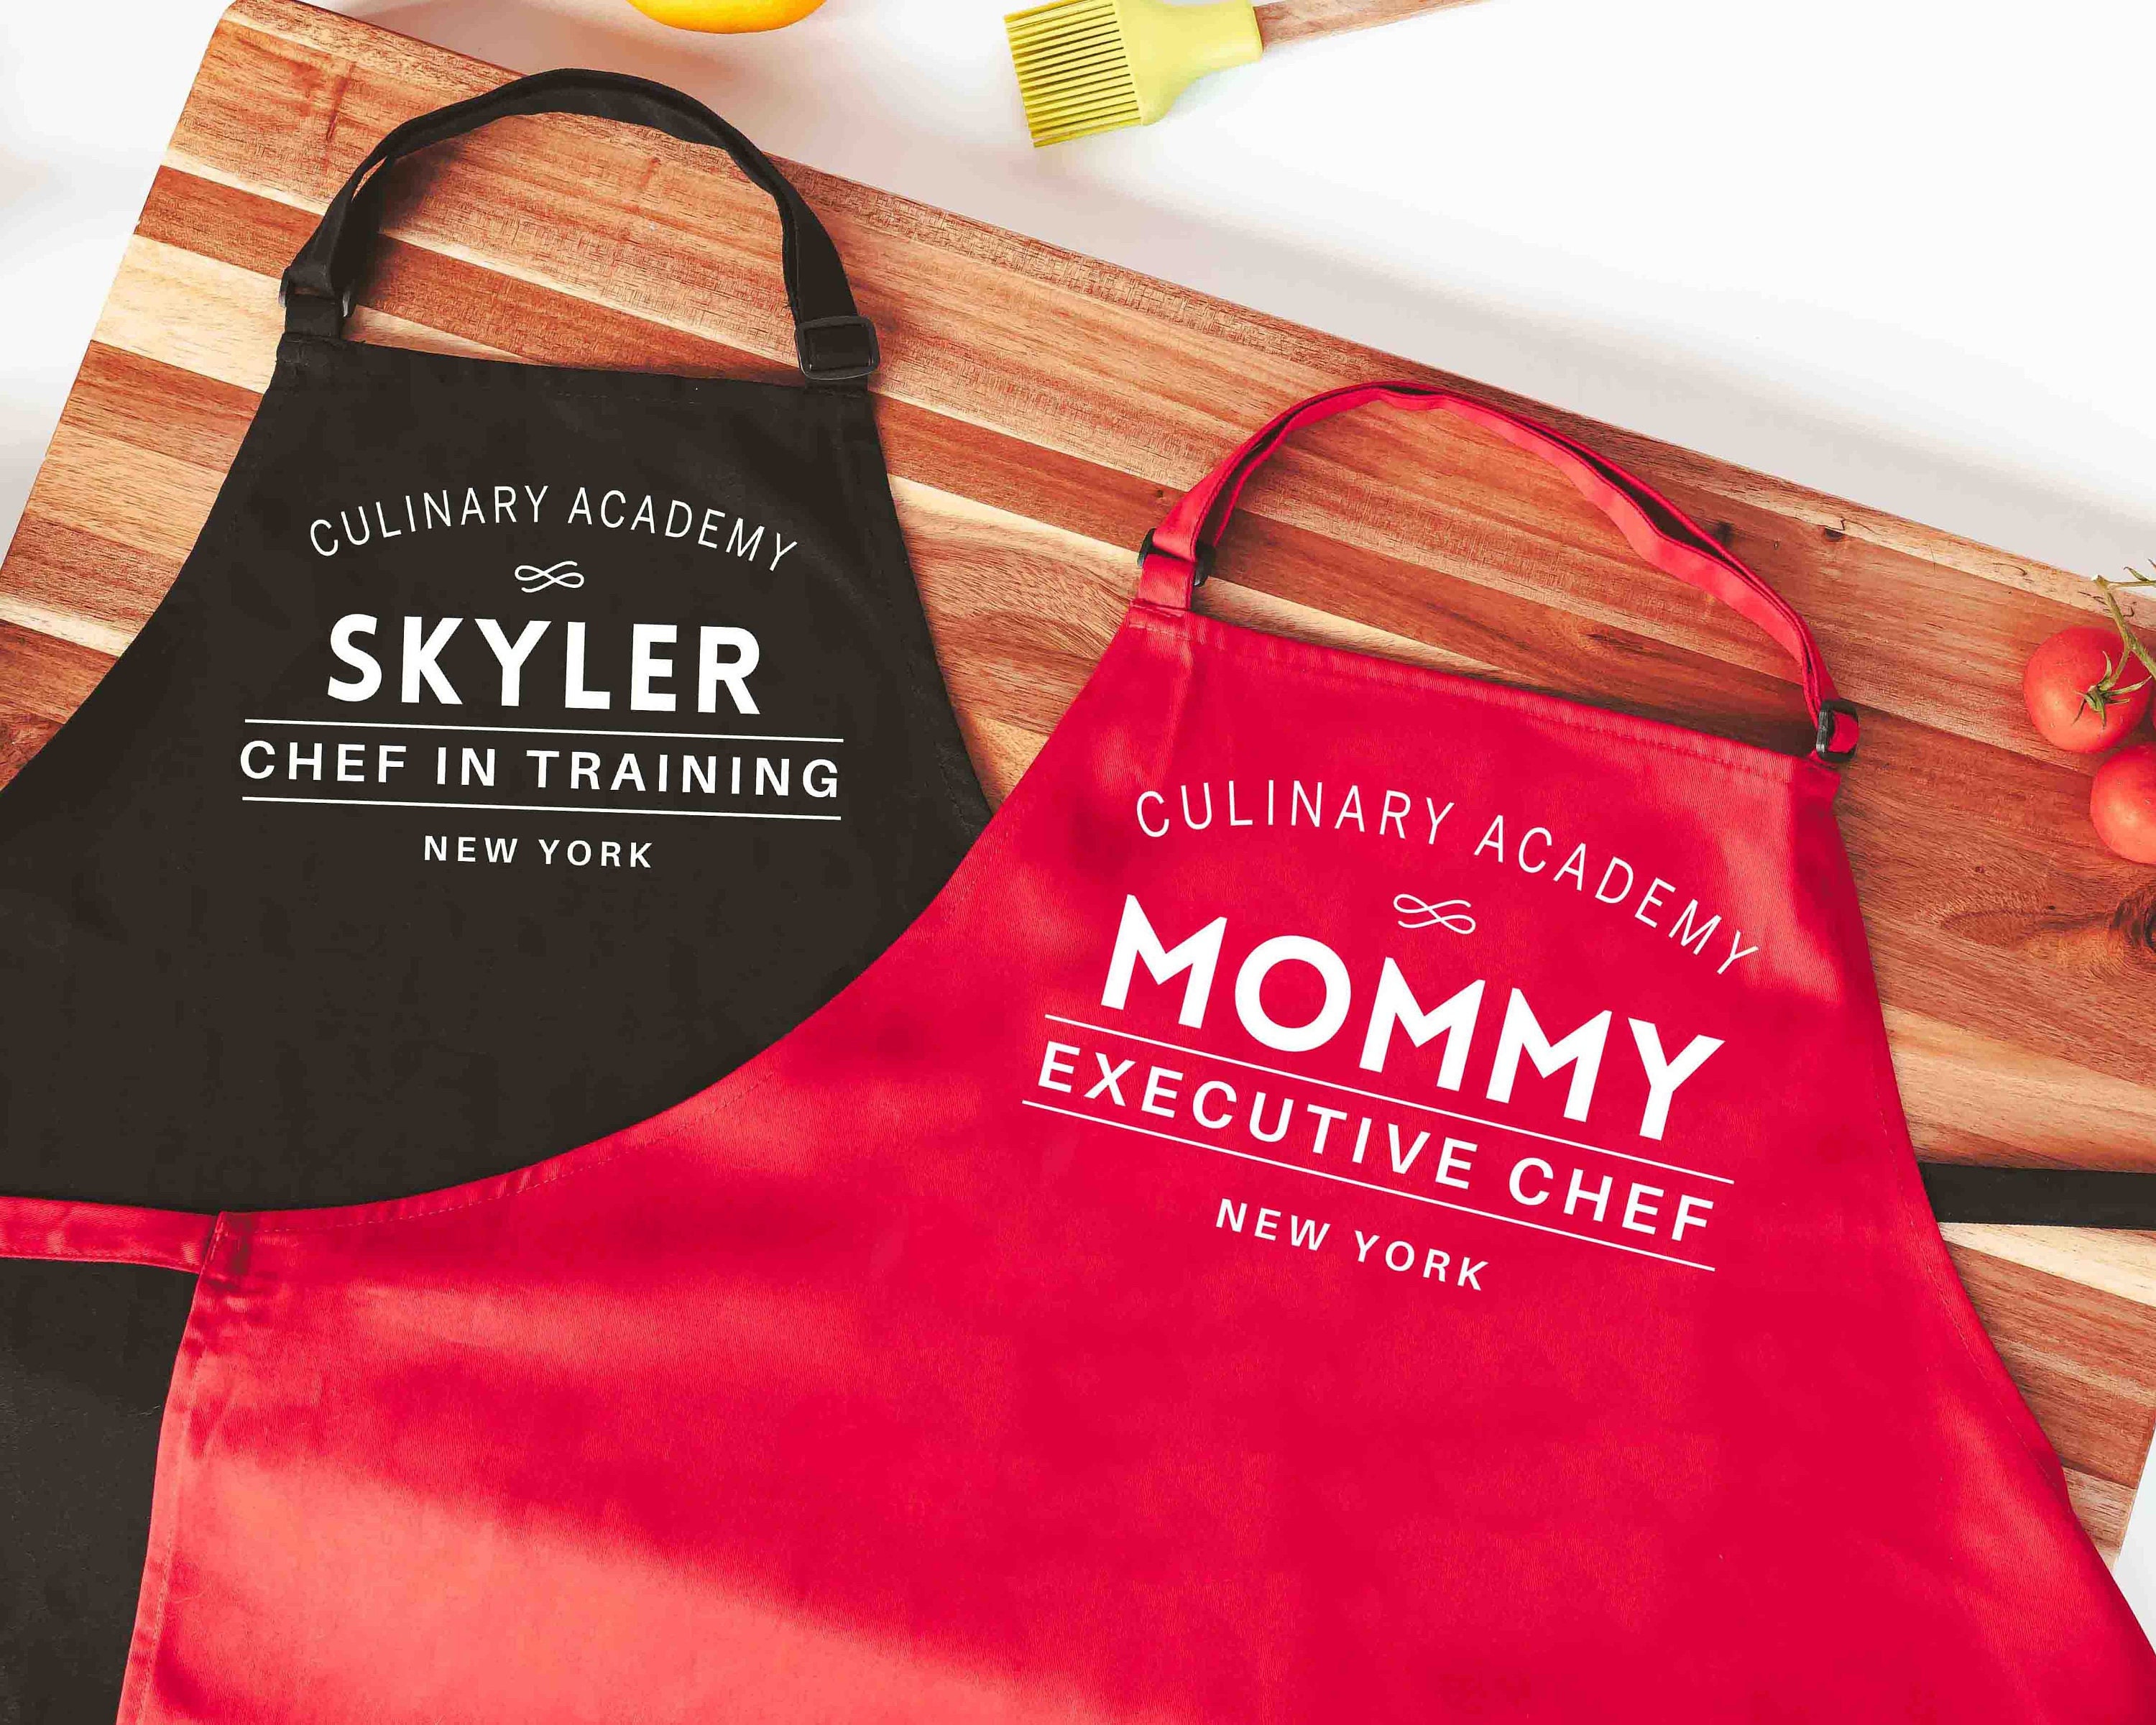 Evergreen Mommy & Me Apron Set of 2, Pastry Chef & Junior Baker